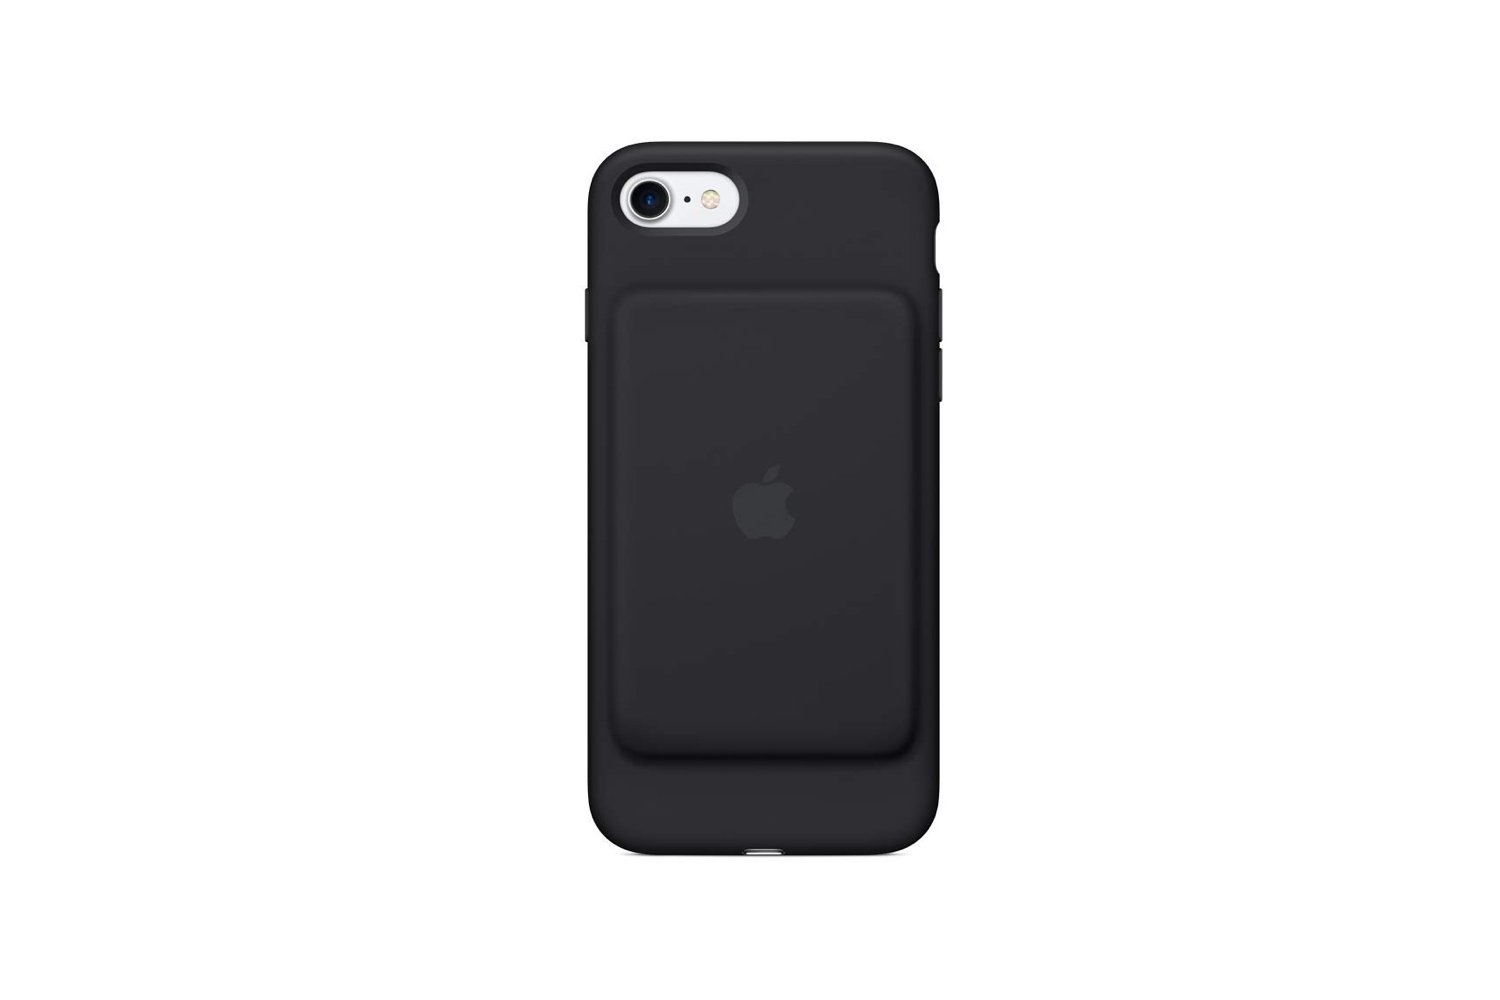 Apple Smart Battery Case For iPhone 7/8 Gives You Extra Battery Backup